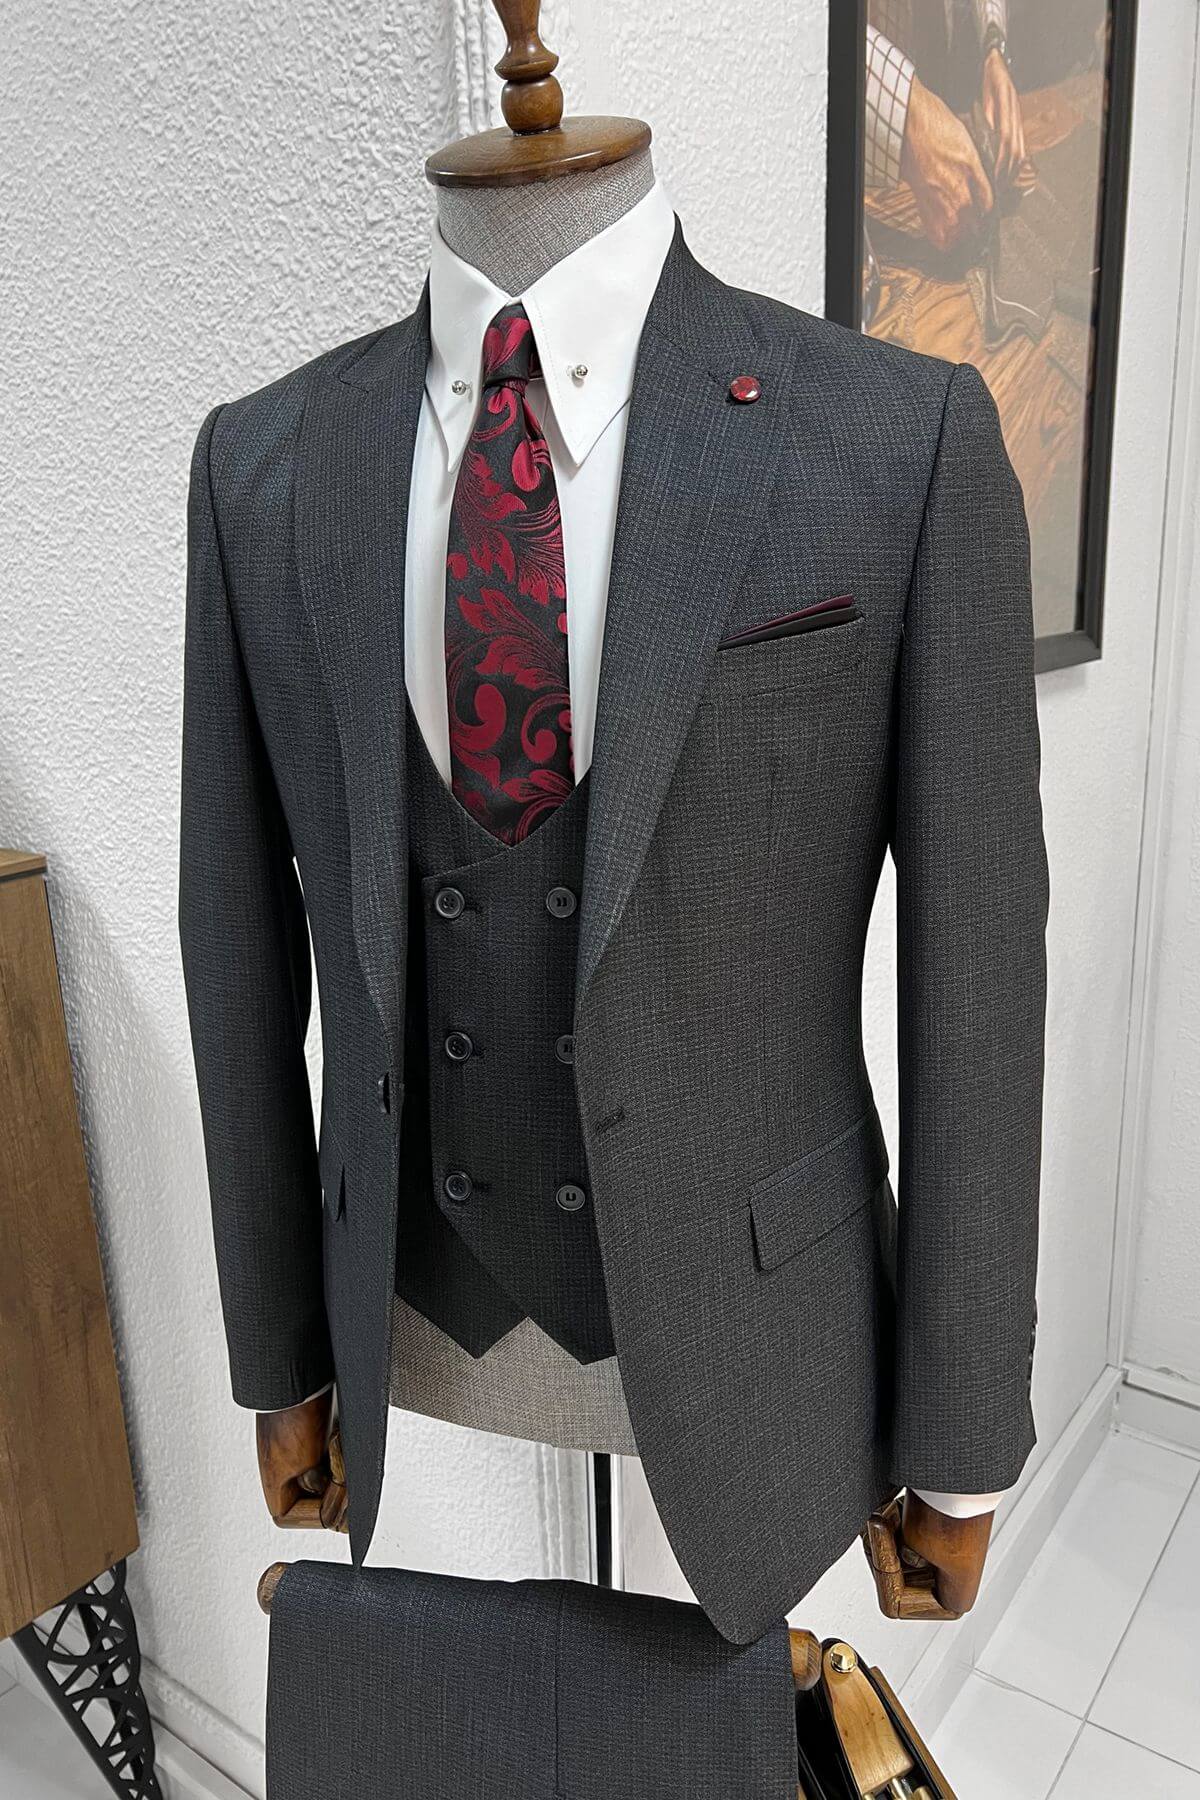 Men's Suits Online | Every stitch is stitched to give you an impressive ...